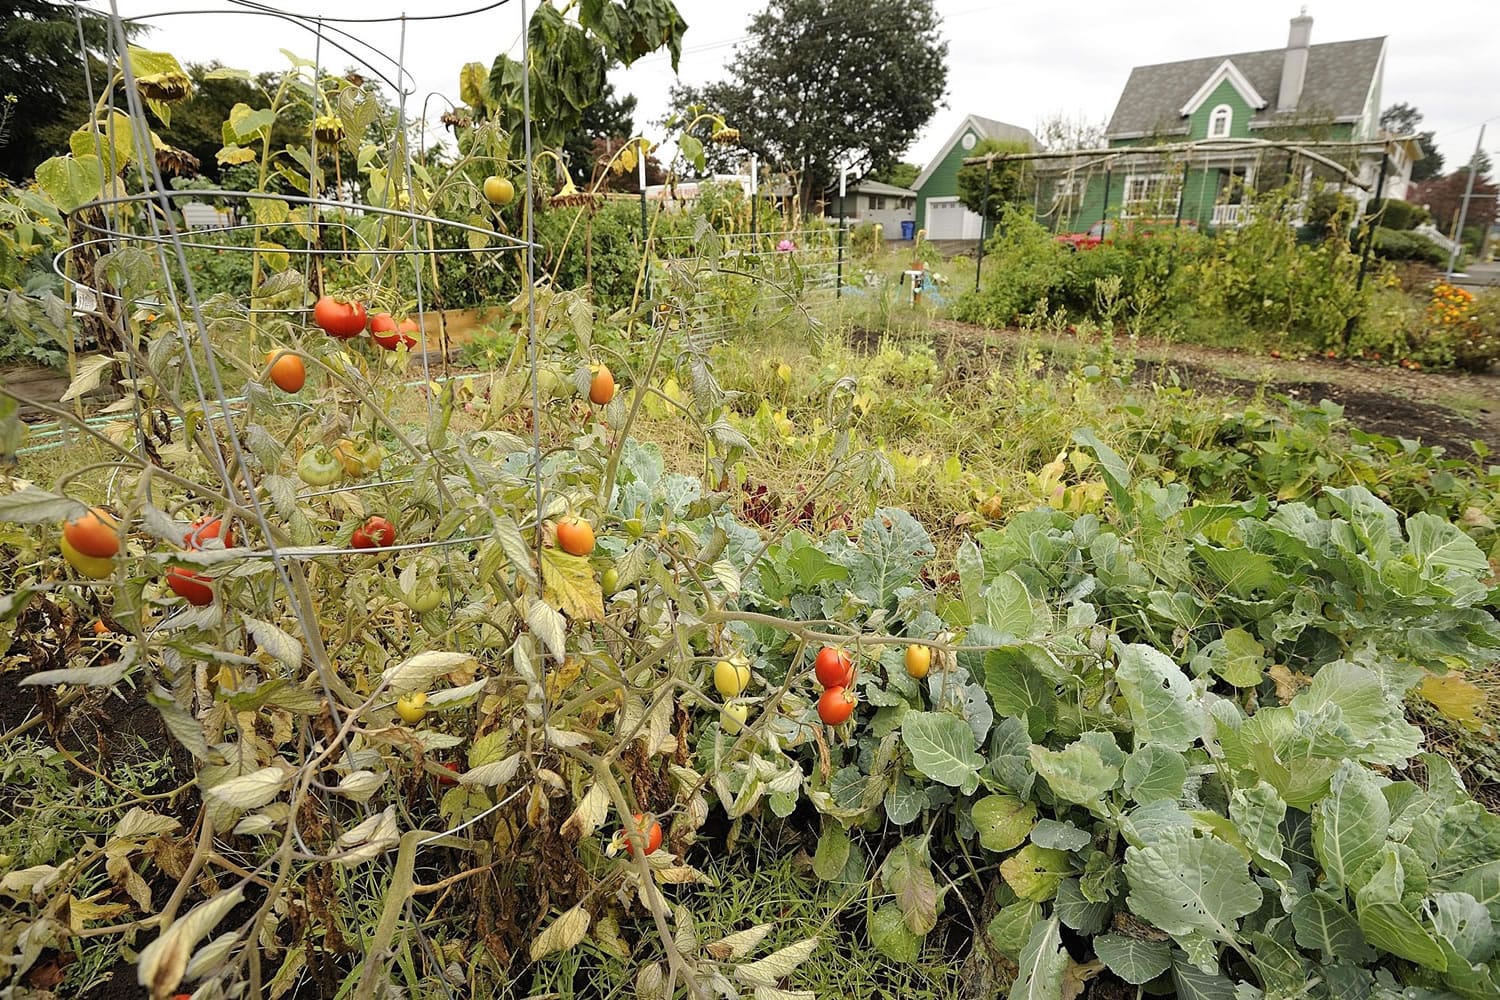 Ripening tomatoes hang from vines at a community garden at the intersection of East Eighth and T streets in Vancouver.